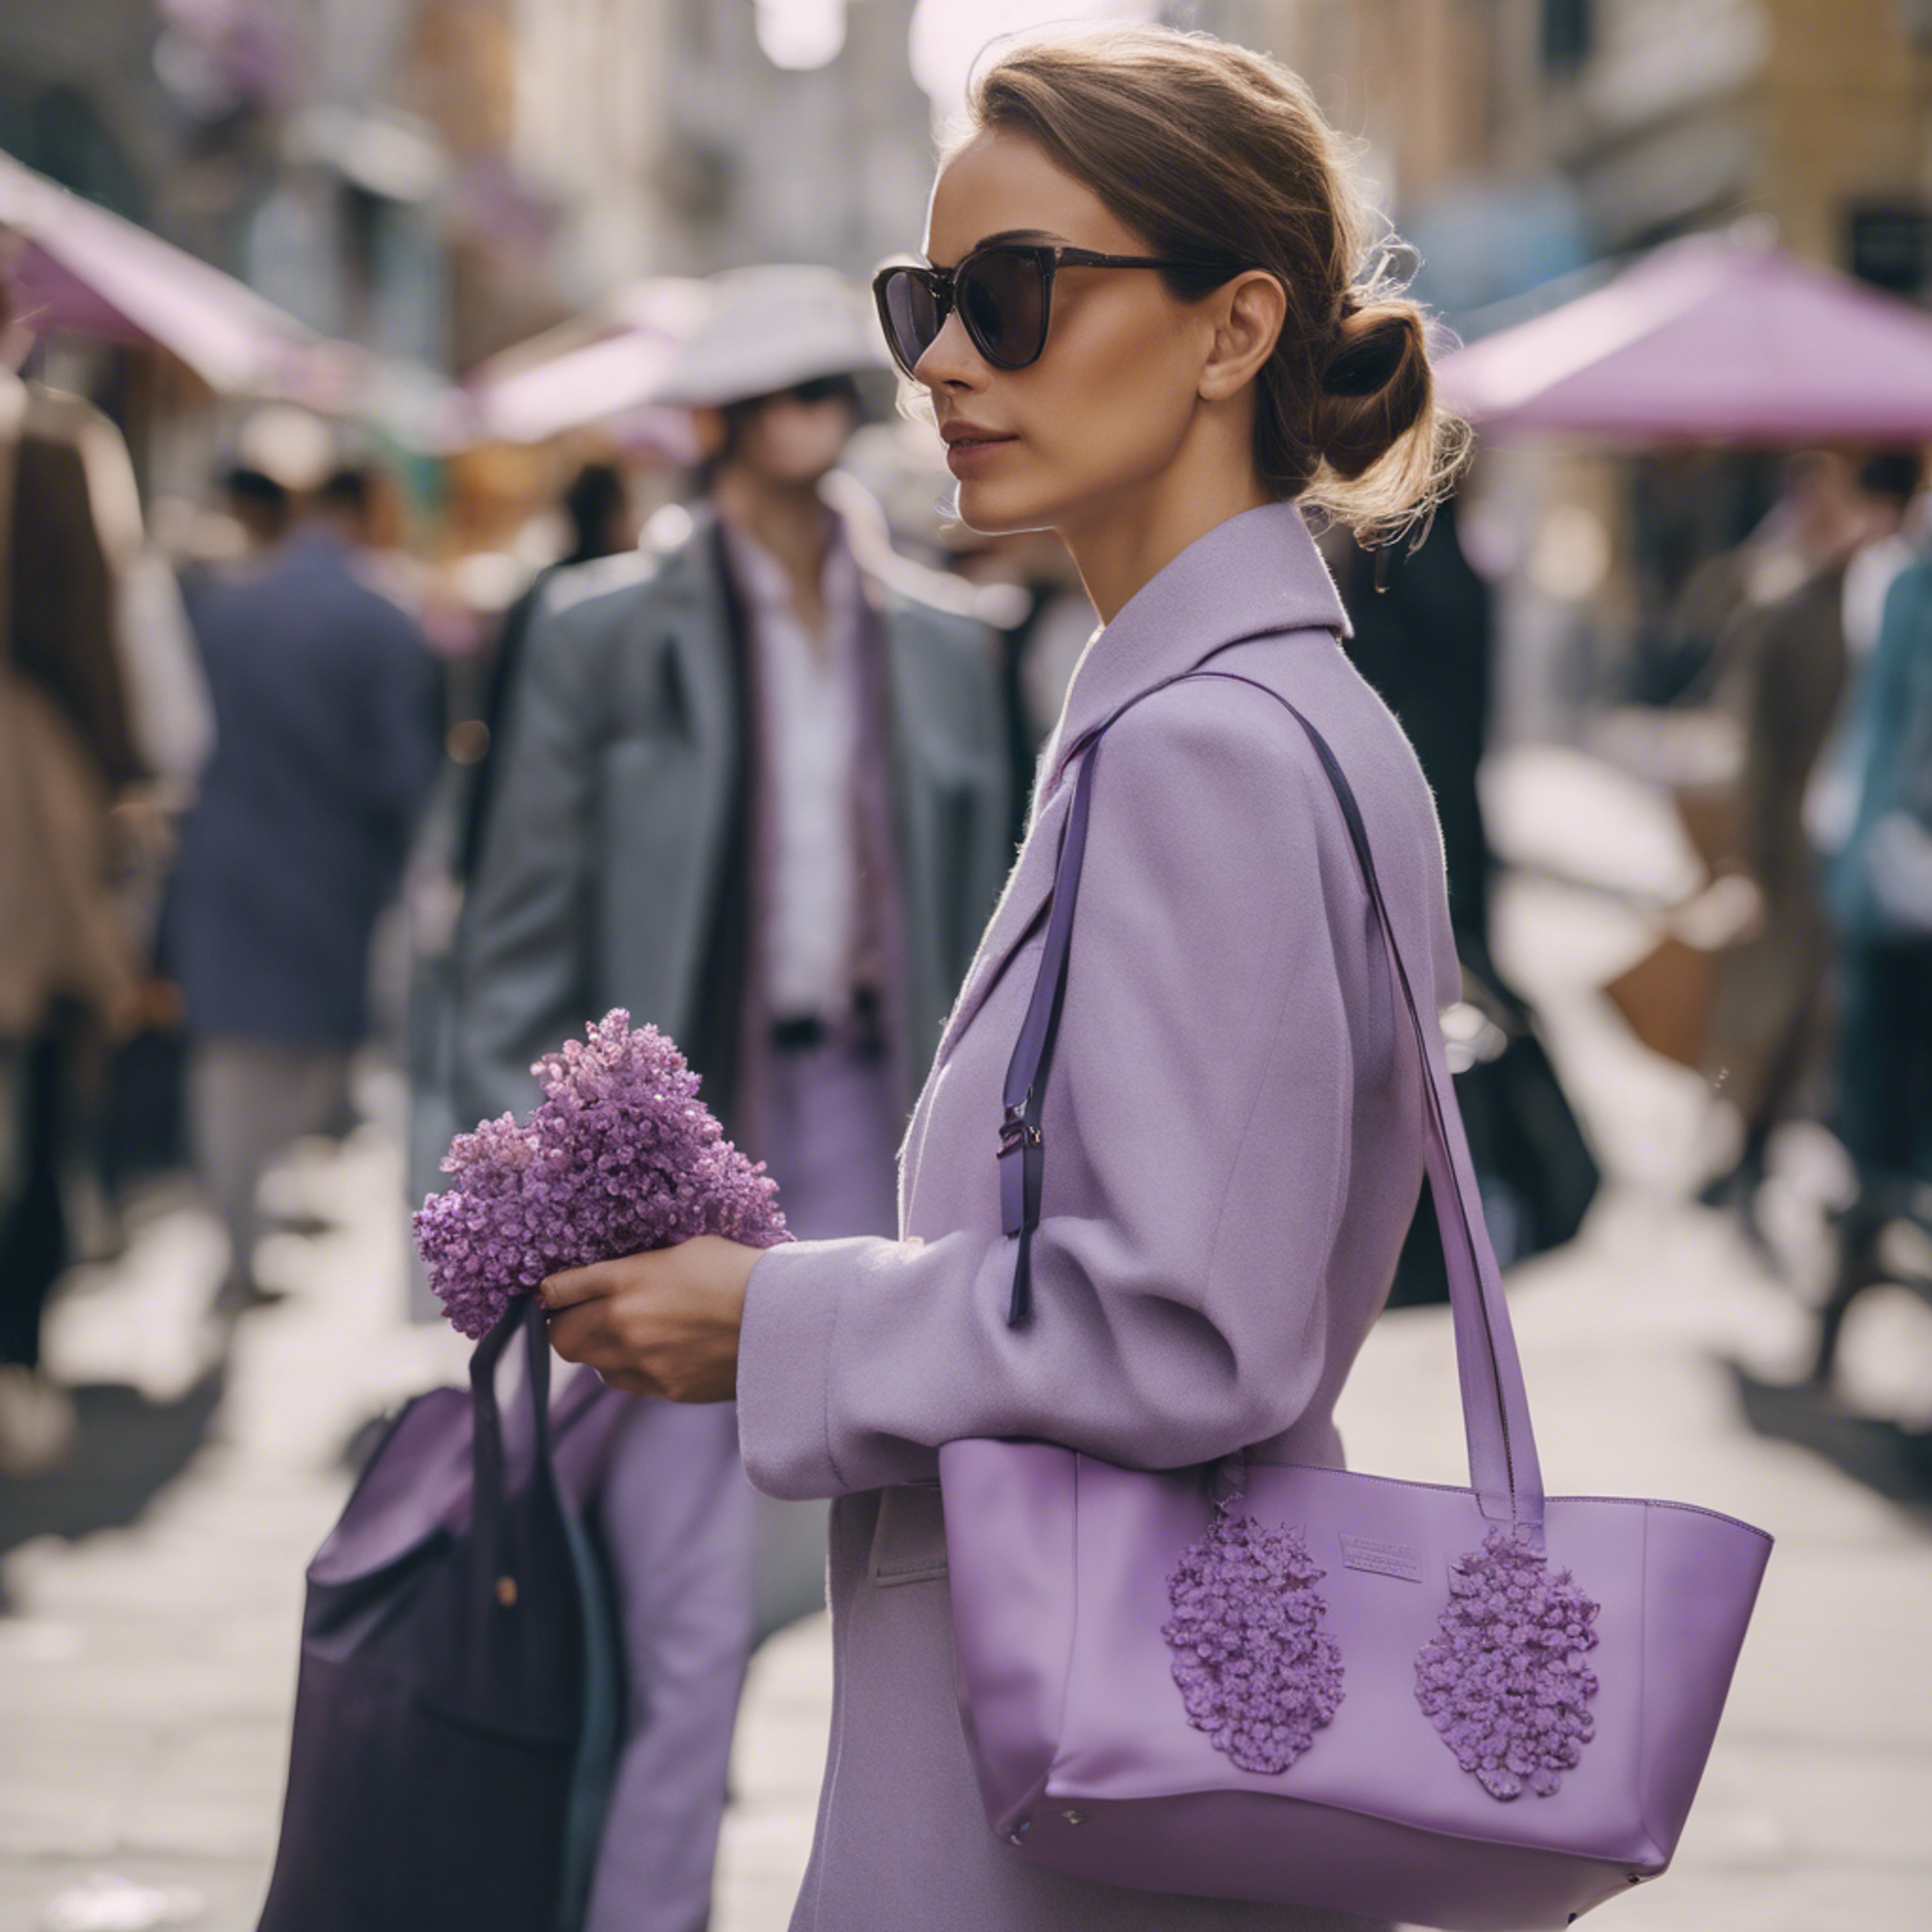 An elegant lady carrying a preppy lilac tote bag while walking along a crowded city street. 牆紙[fda66da185c34bc685d3]